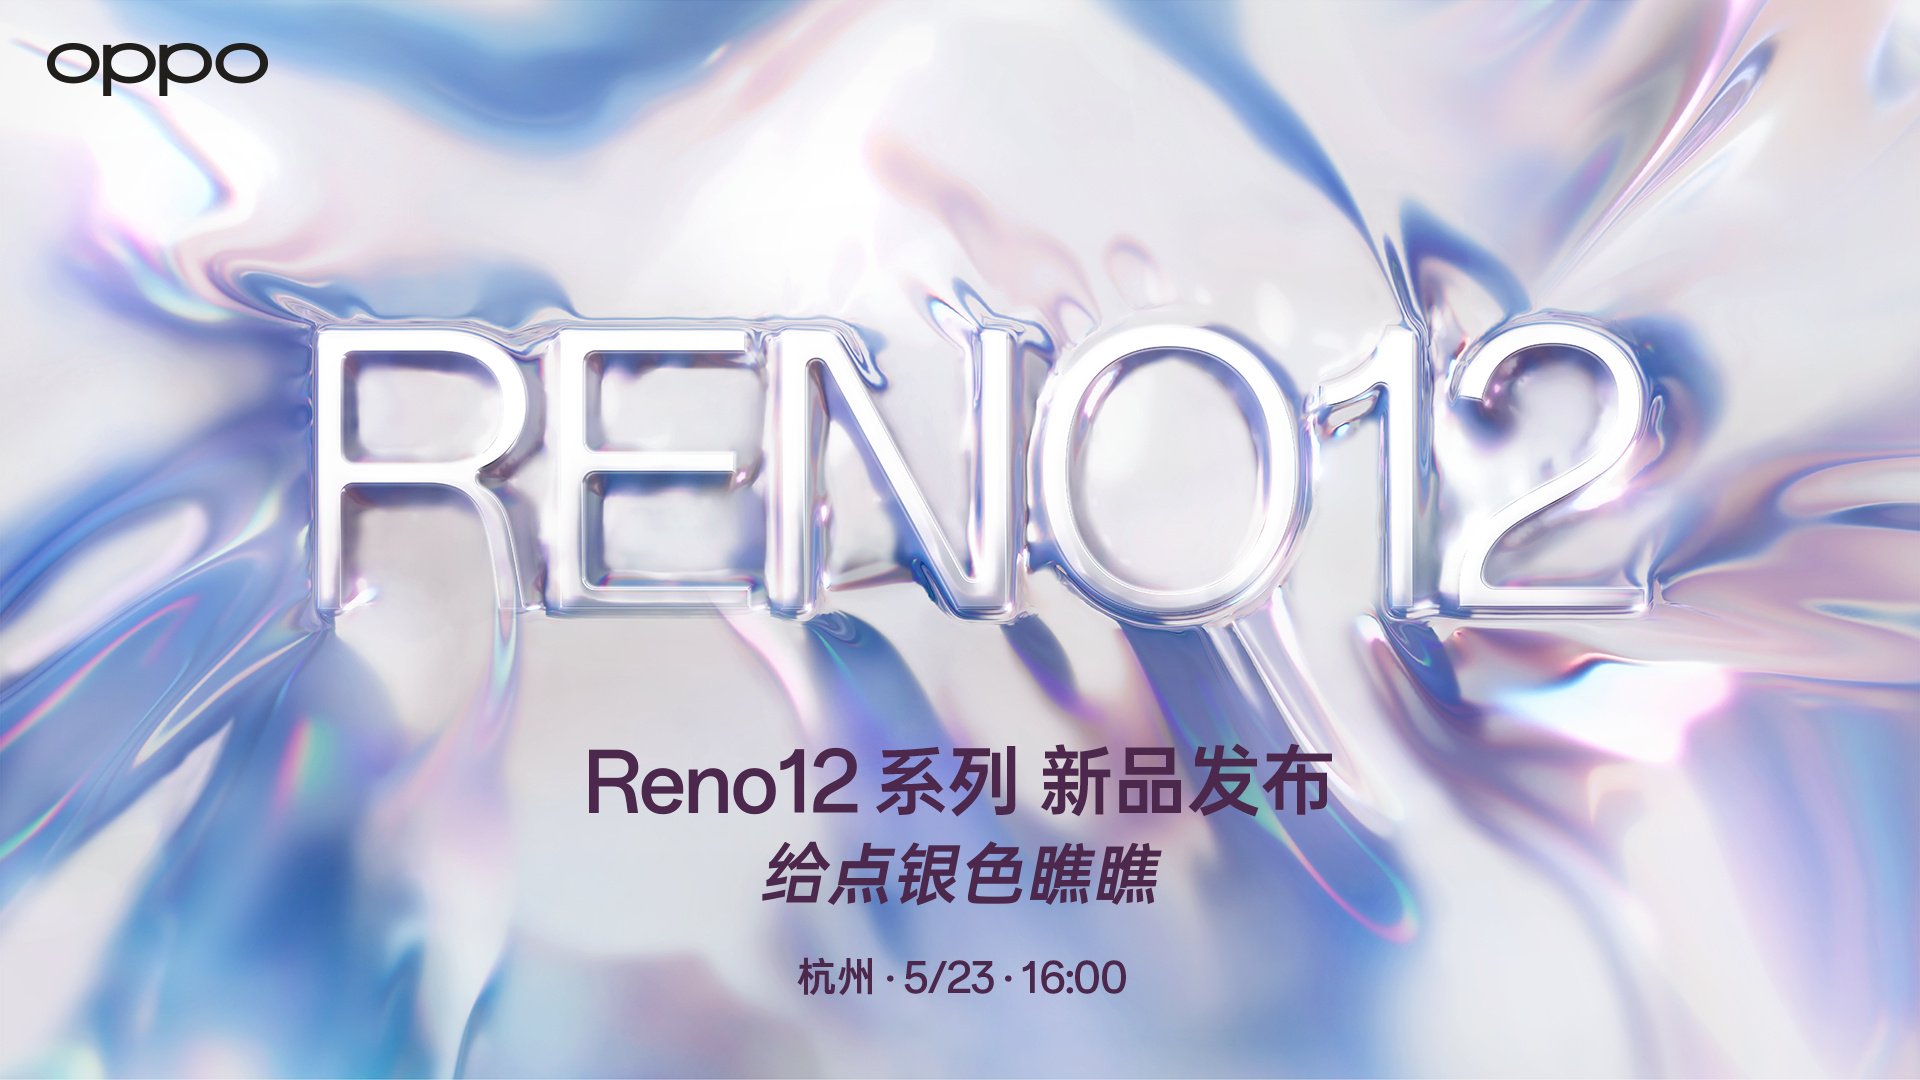 Oppo Reno 12 series launch set for May 23; Everything we know so far - News - News